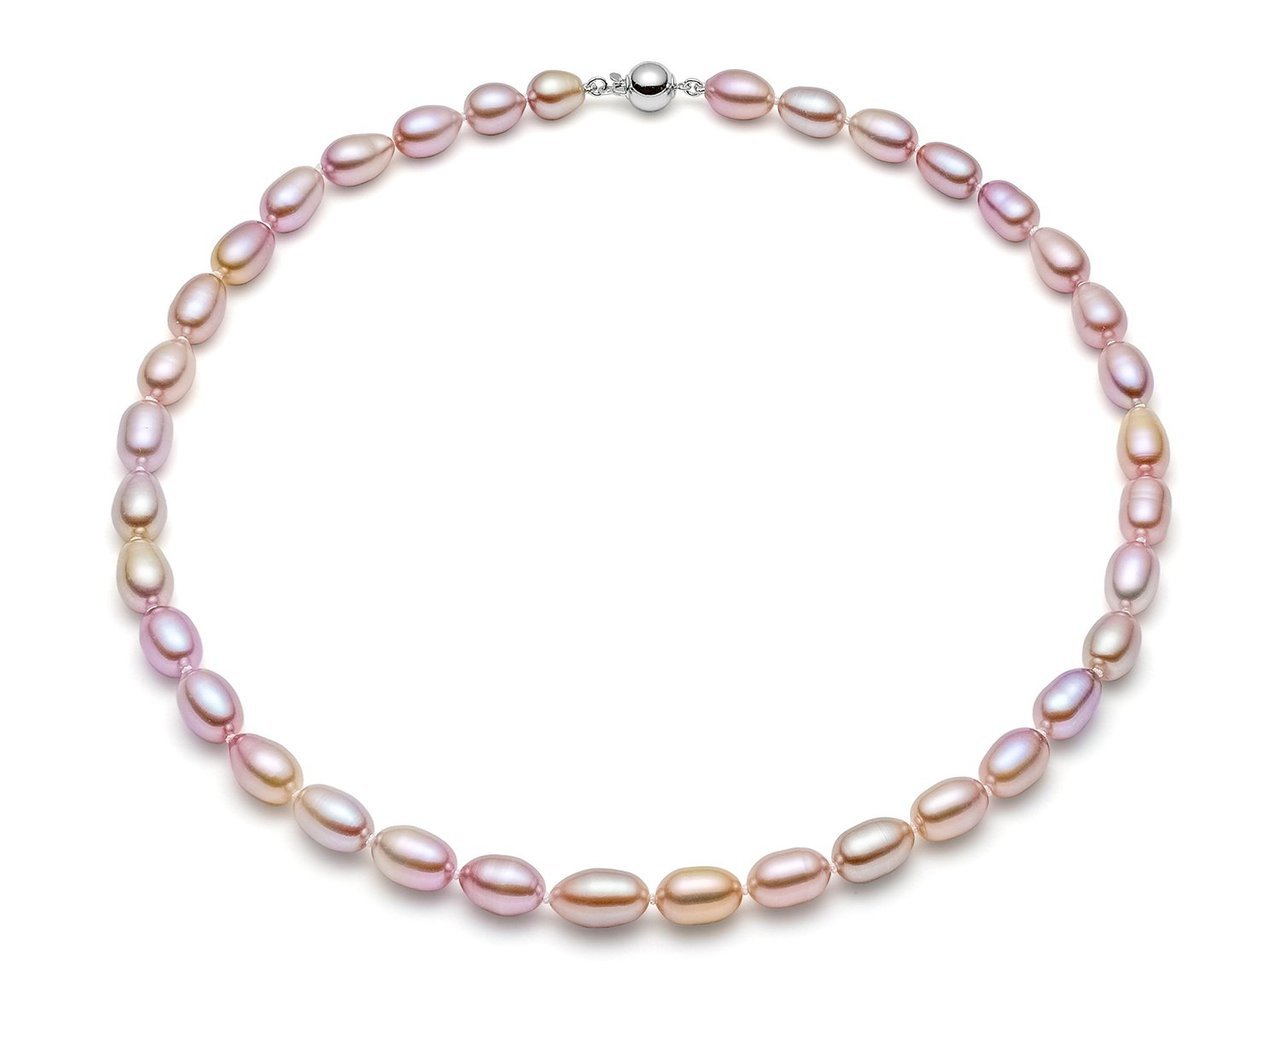 325-236 - Fresh Water Multi Baroque Pearl Necklace - 18